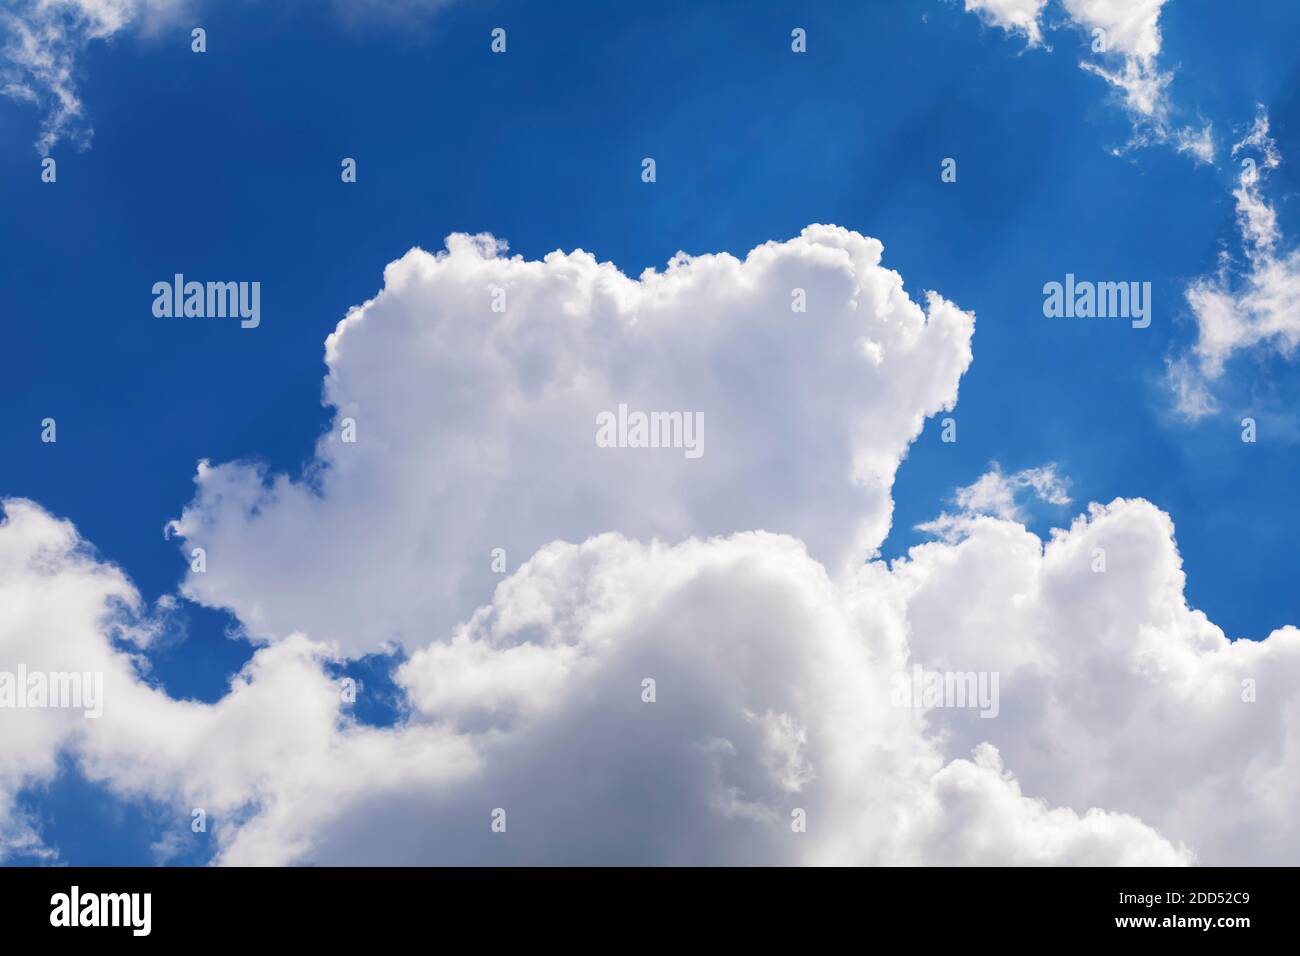 Dramatic white clouds float in the blue sky. Stock Photo